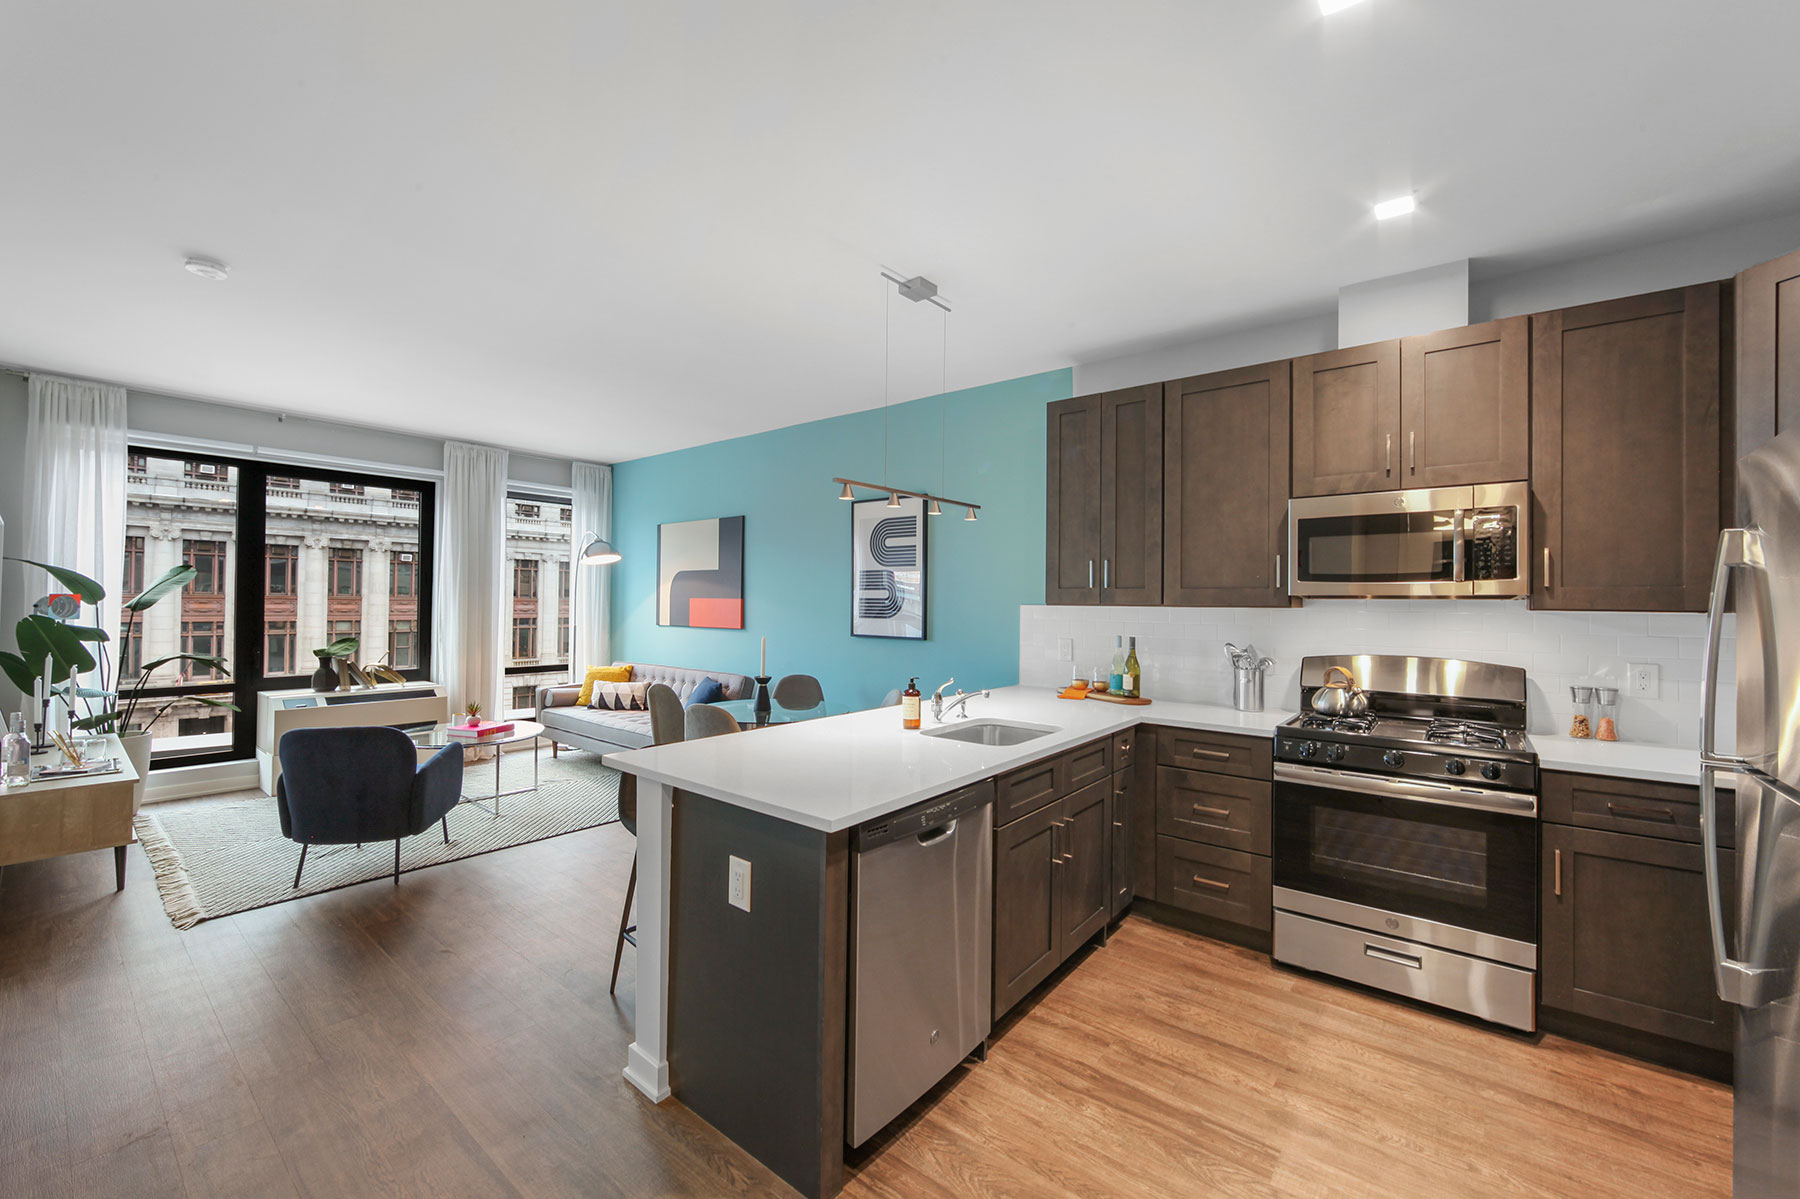 Bright modern kitchen with light counters, dark wood cabinetry, stainless steel appliances and modern fixtures and wood floors opening up to bright living room with large windows